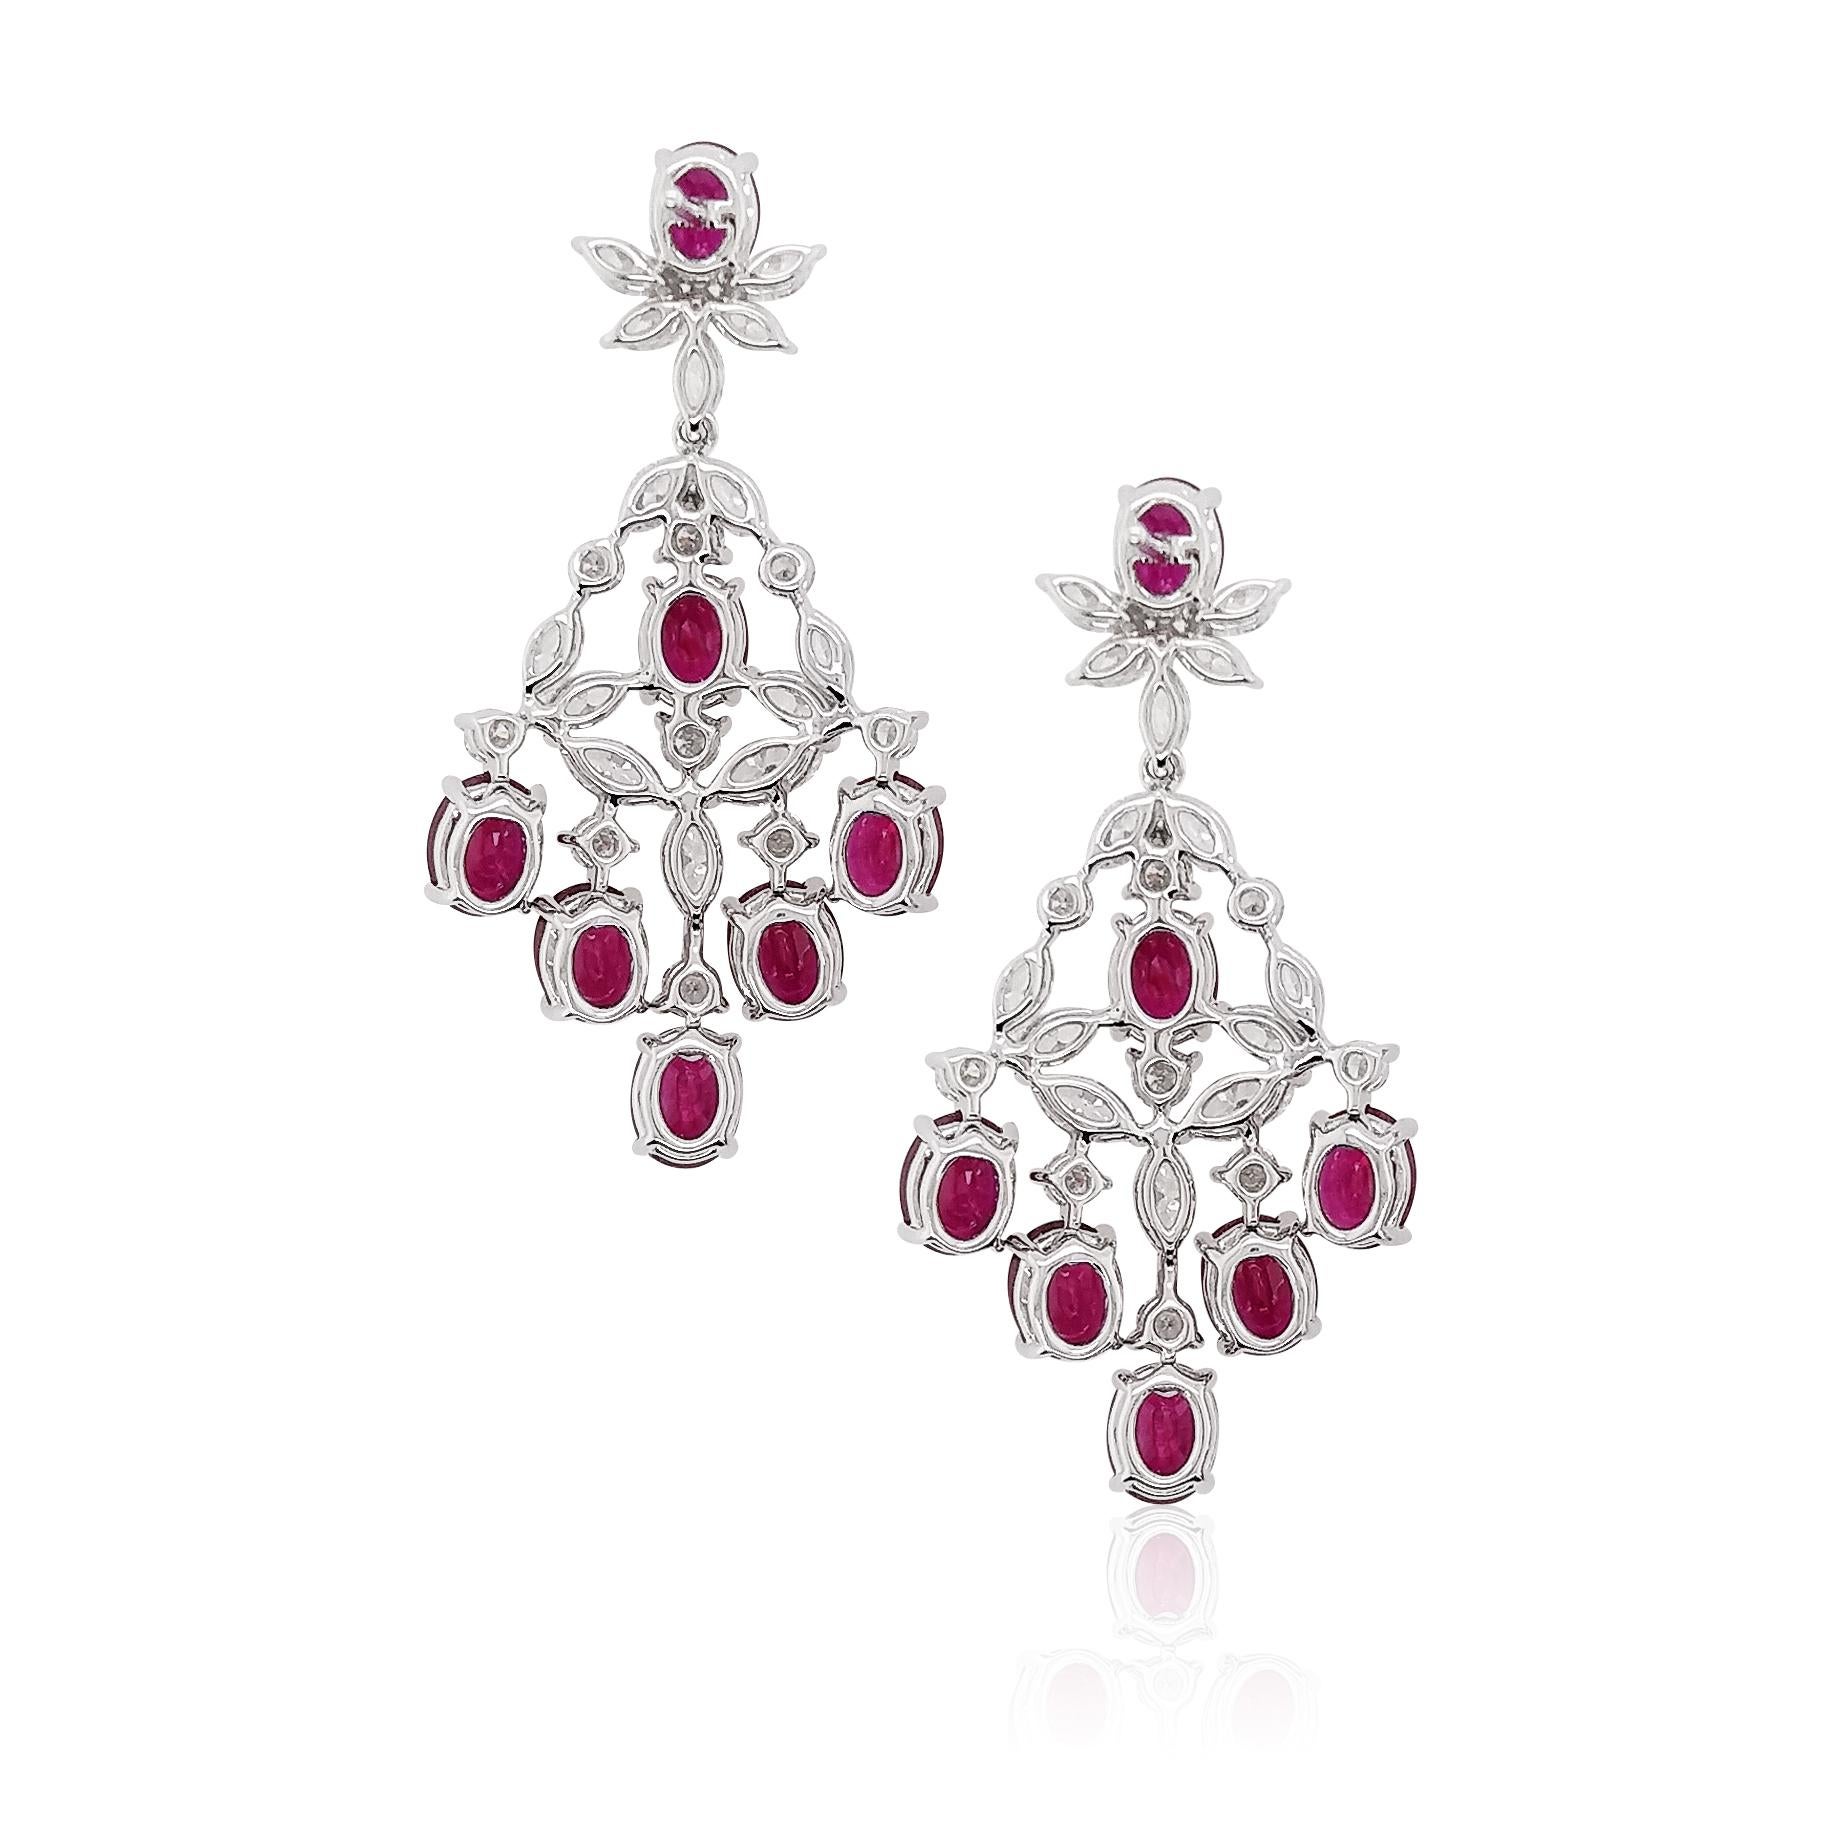 These gorgeous earrings feature vinaceous and lustrous, high-quality Burmese Rubies, accentuated by 18 Karat white gold and scintillating white diamonds. A contemporary way to wear rubies, these striking earrings will elevate any outfit.
-	Oval